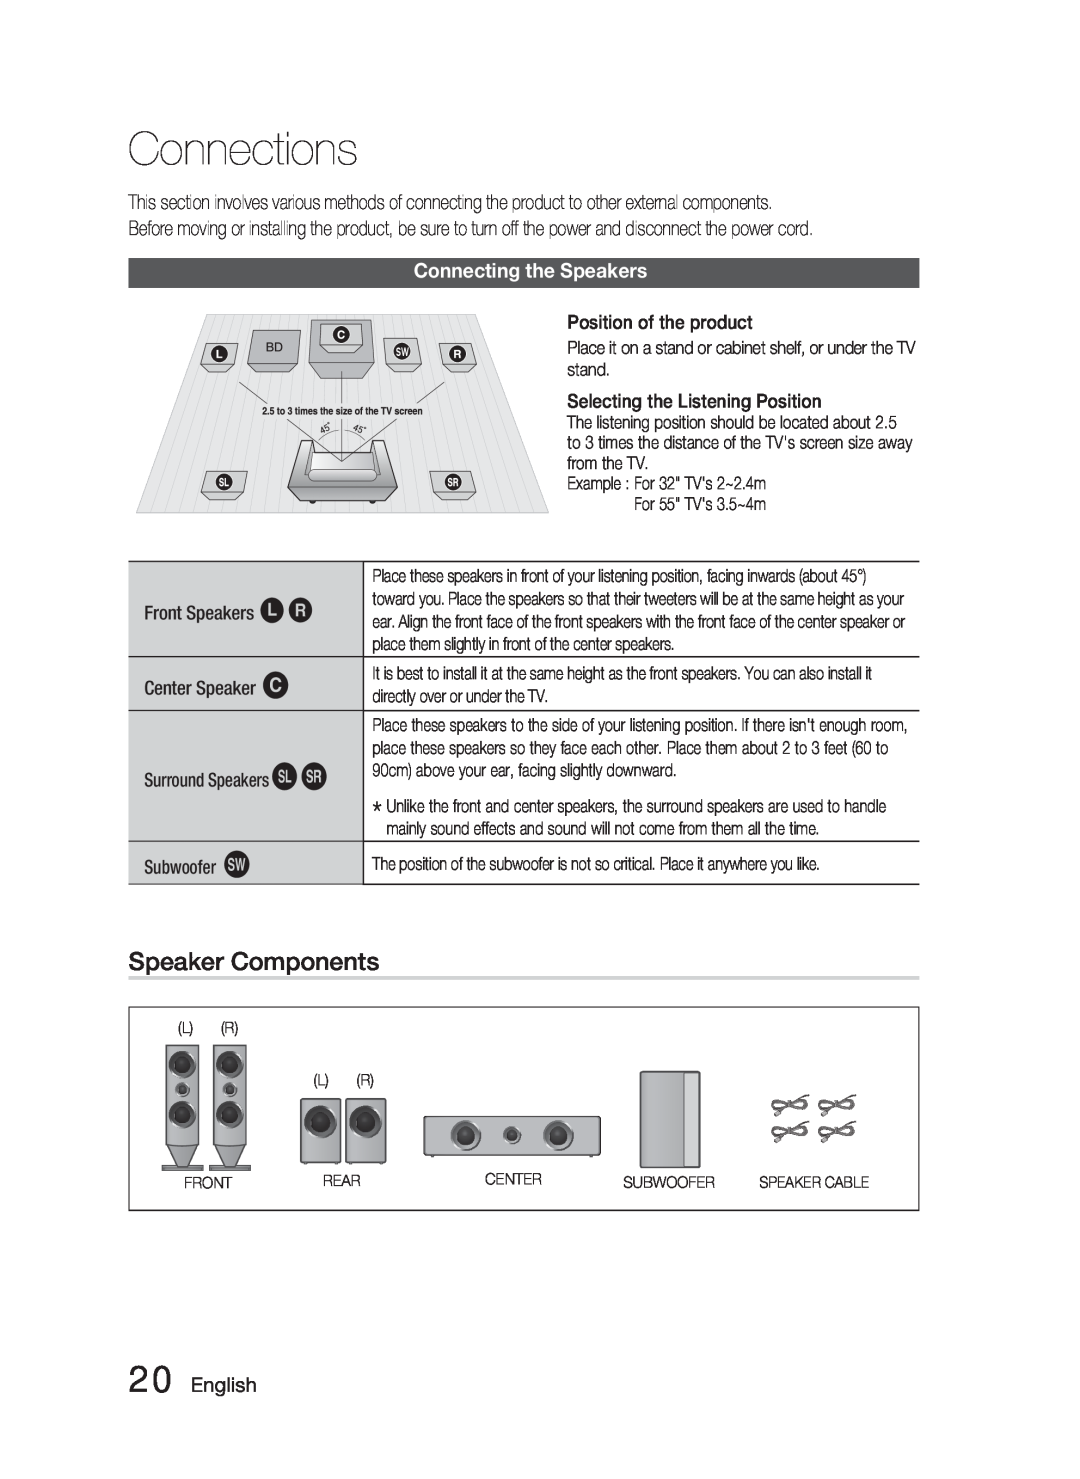 Samsung AH68-02279R user manual Connections, Speaker Components, Connecting the Speakers, English 